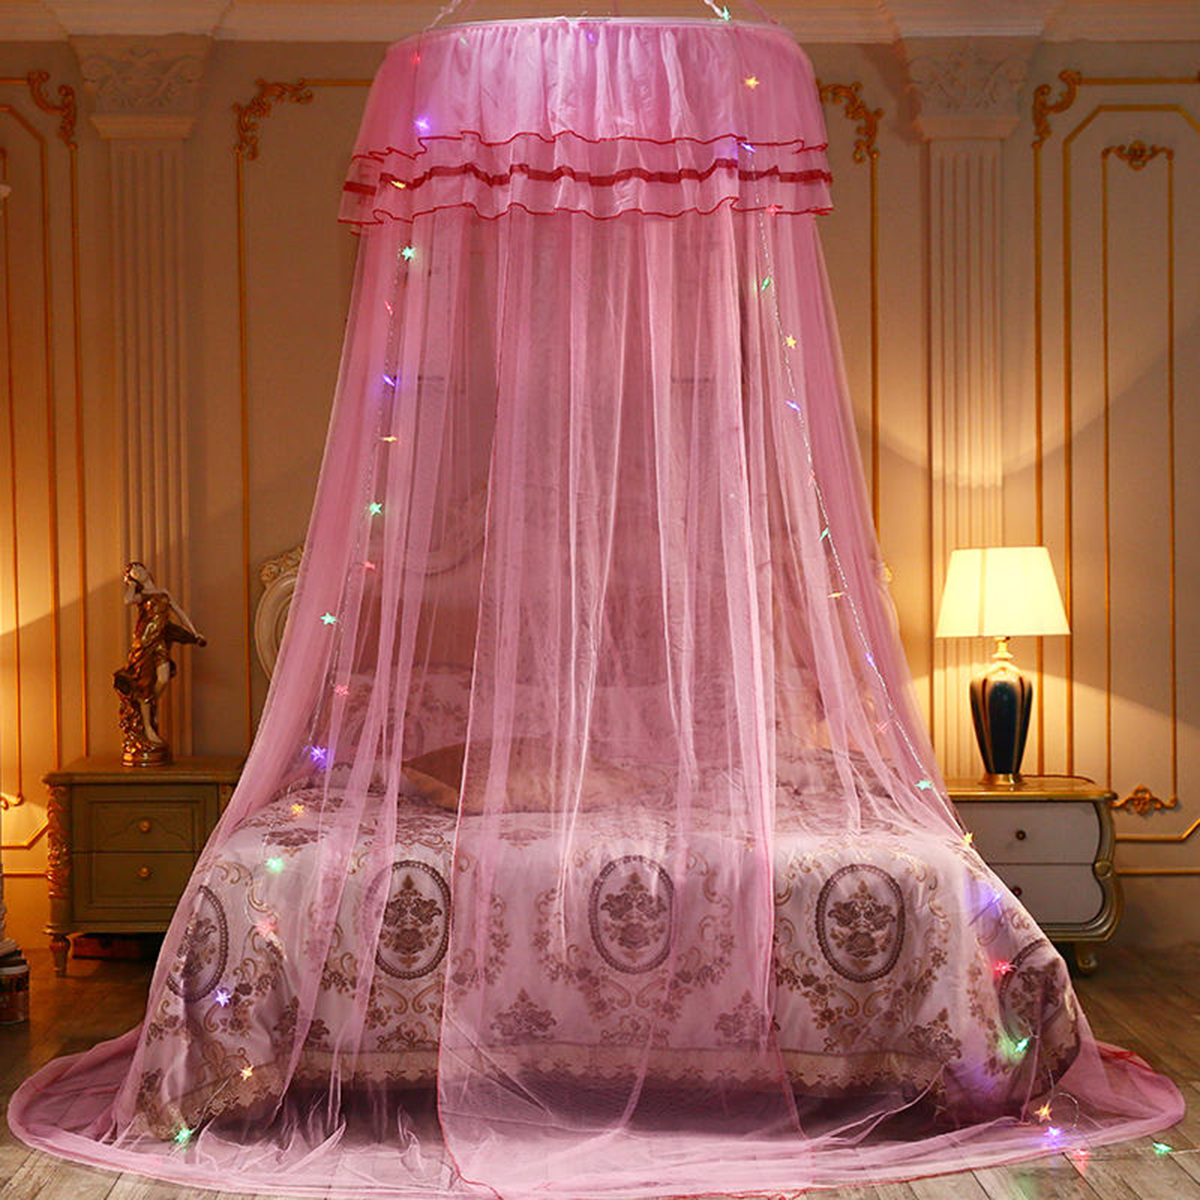 Mosquito-Net-Bedding-Lace-LED-Light-Princess-Dome-Mesh-Bed-Canopy-Bedroom-Decor-1682937-2